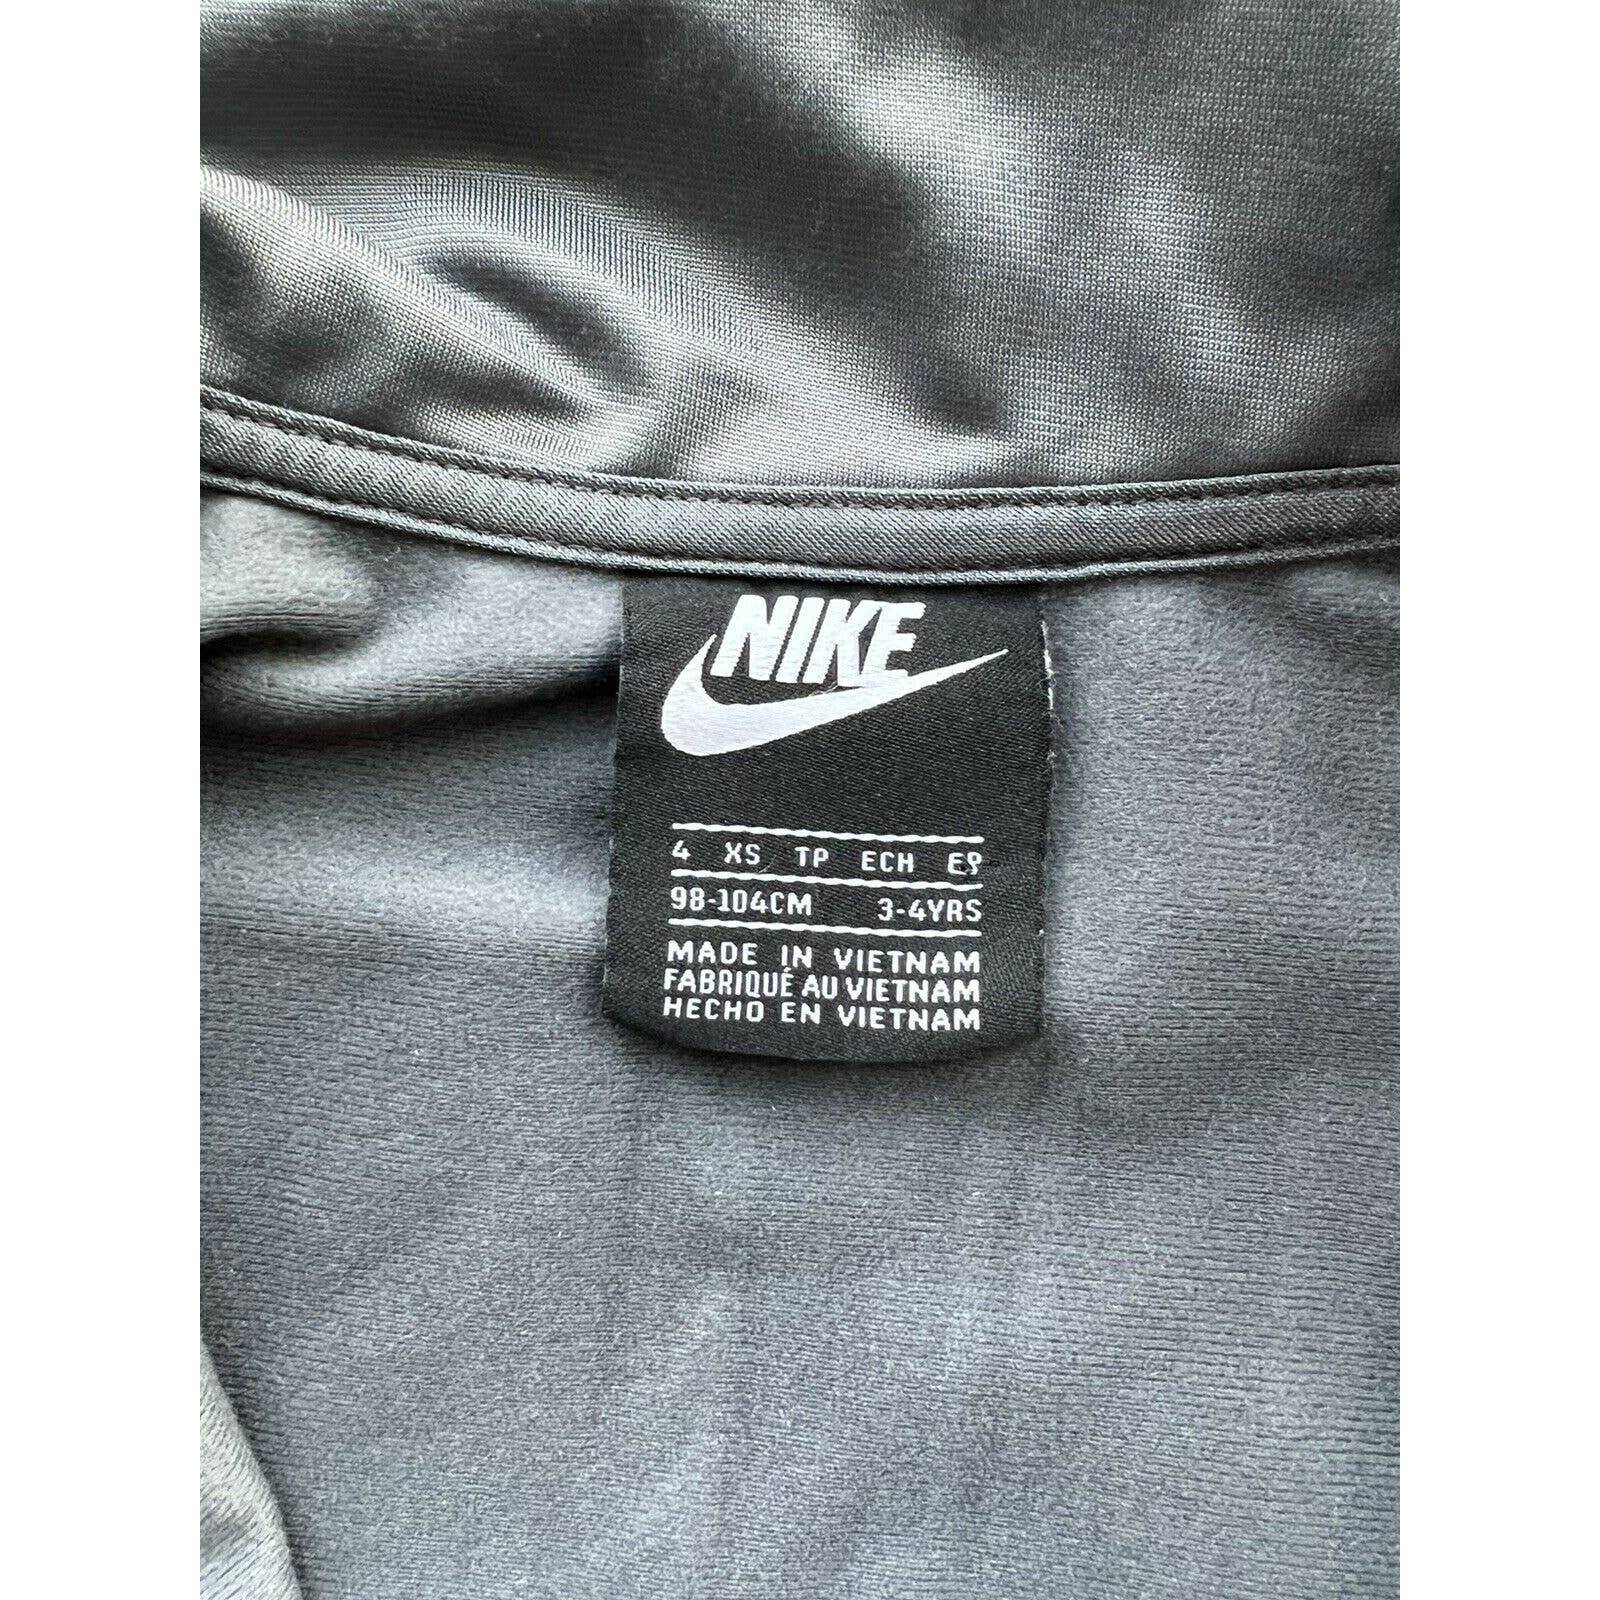 Nike Boys Track Jacket Size 4/XS (3-4years) Gray And Black Full-Zip Just Do It